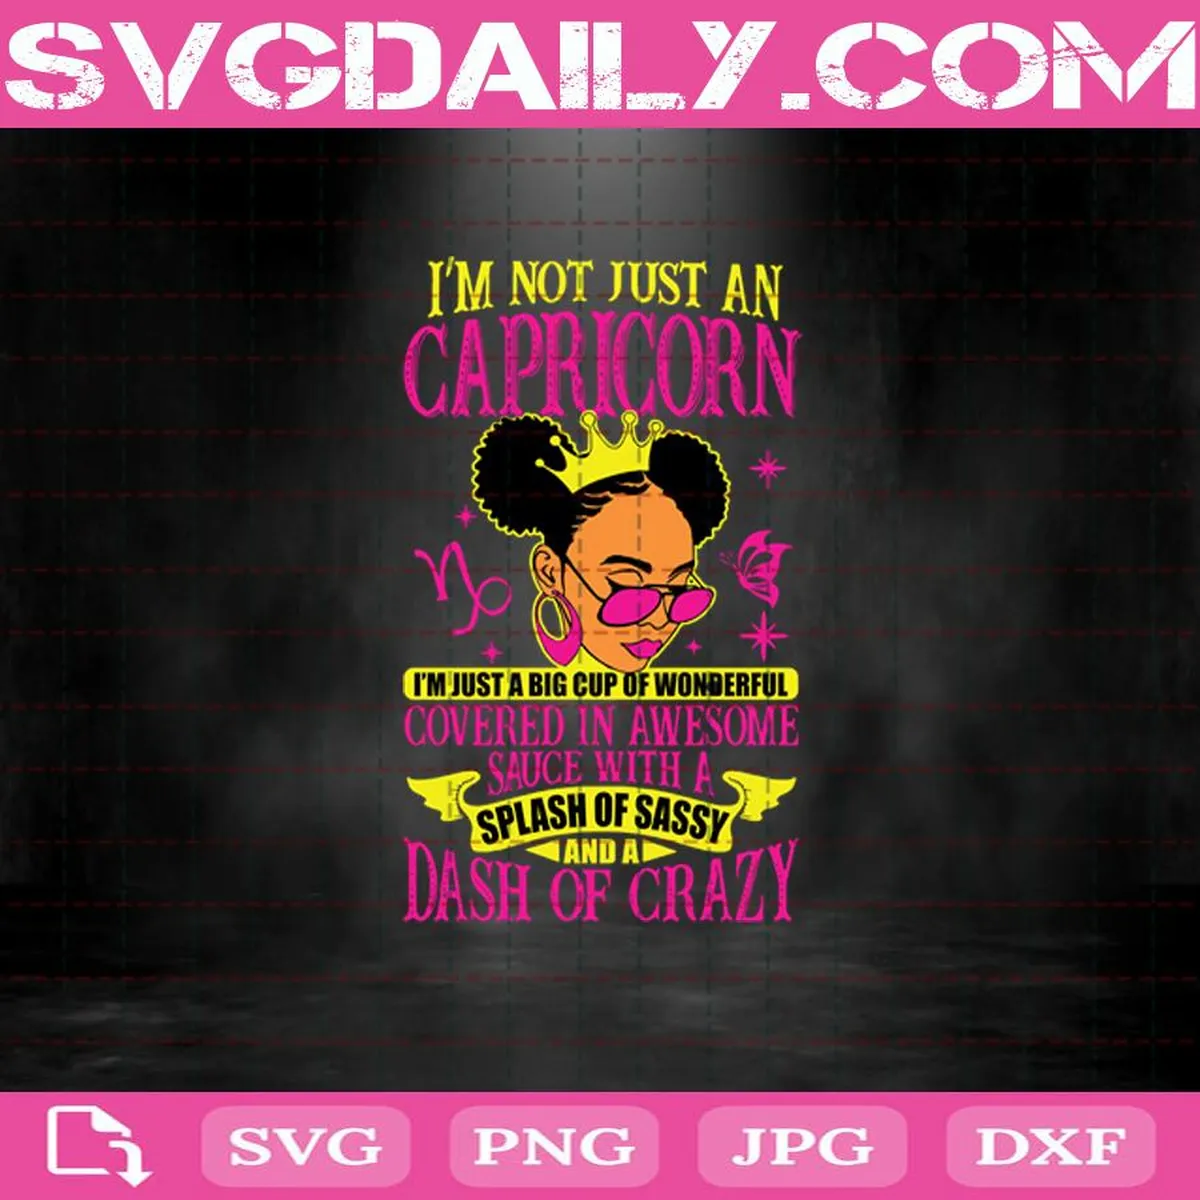 I’m Not Just An Capricorn I’m Just A Big Cup Of Wonderful Covered In Awesome Sauce With A Splash Of Sassy And A Dash Of Crazy Svg, Capricorn Svg